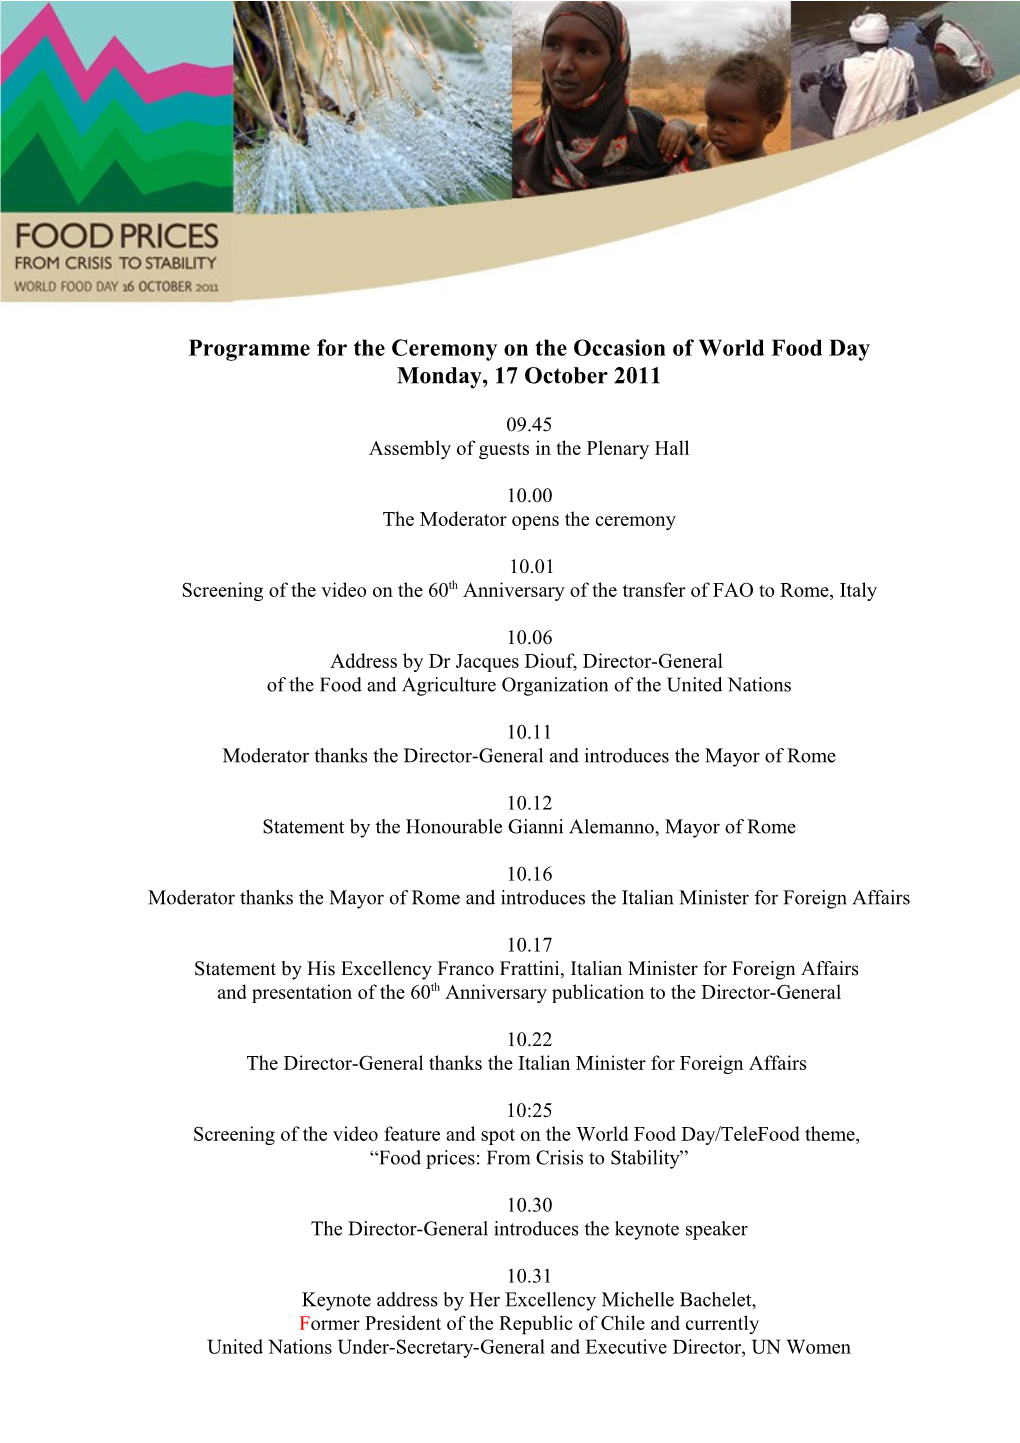 Programme for the Ceremony on the Occasion of World Food Day